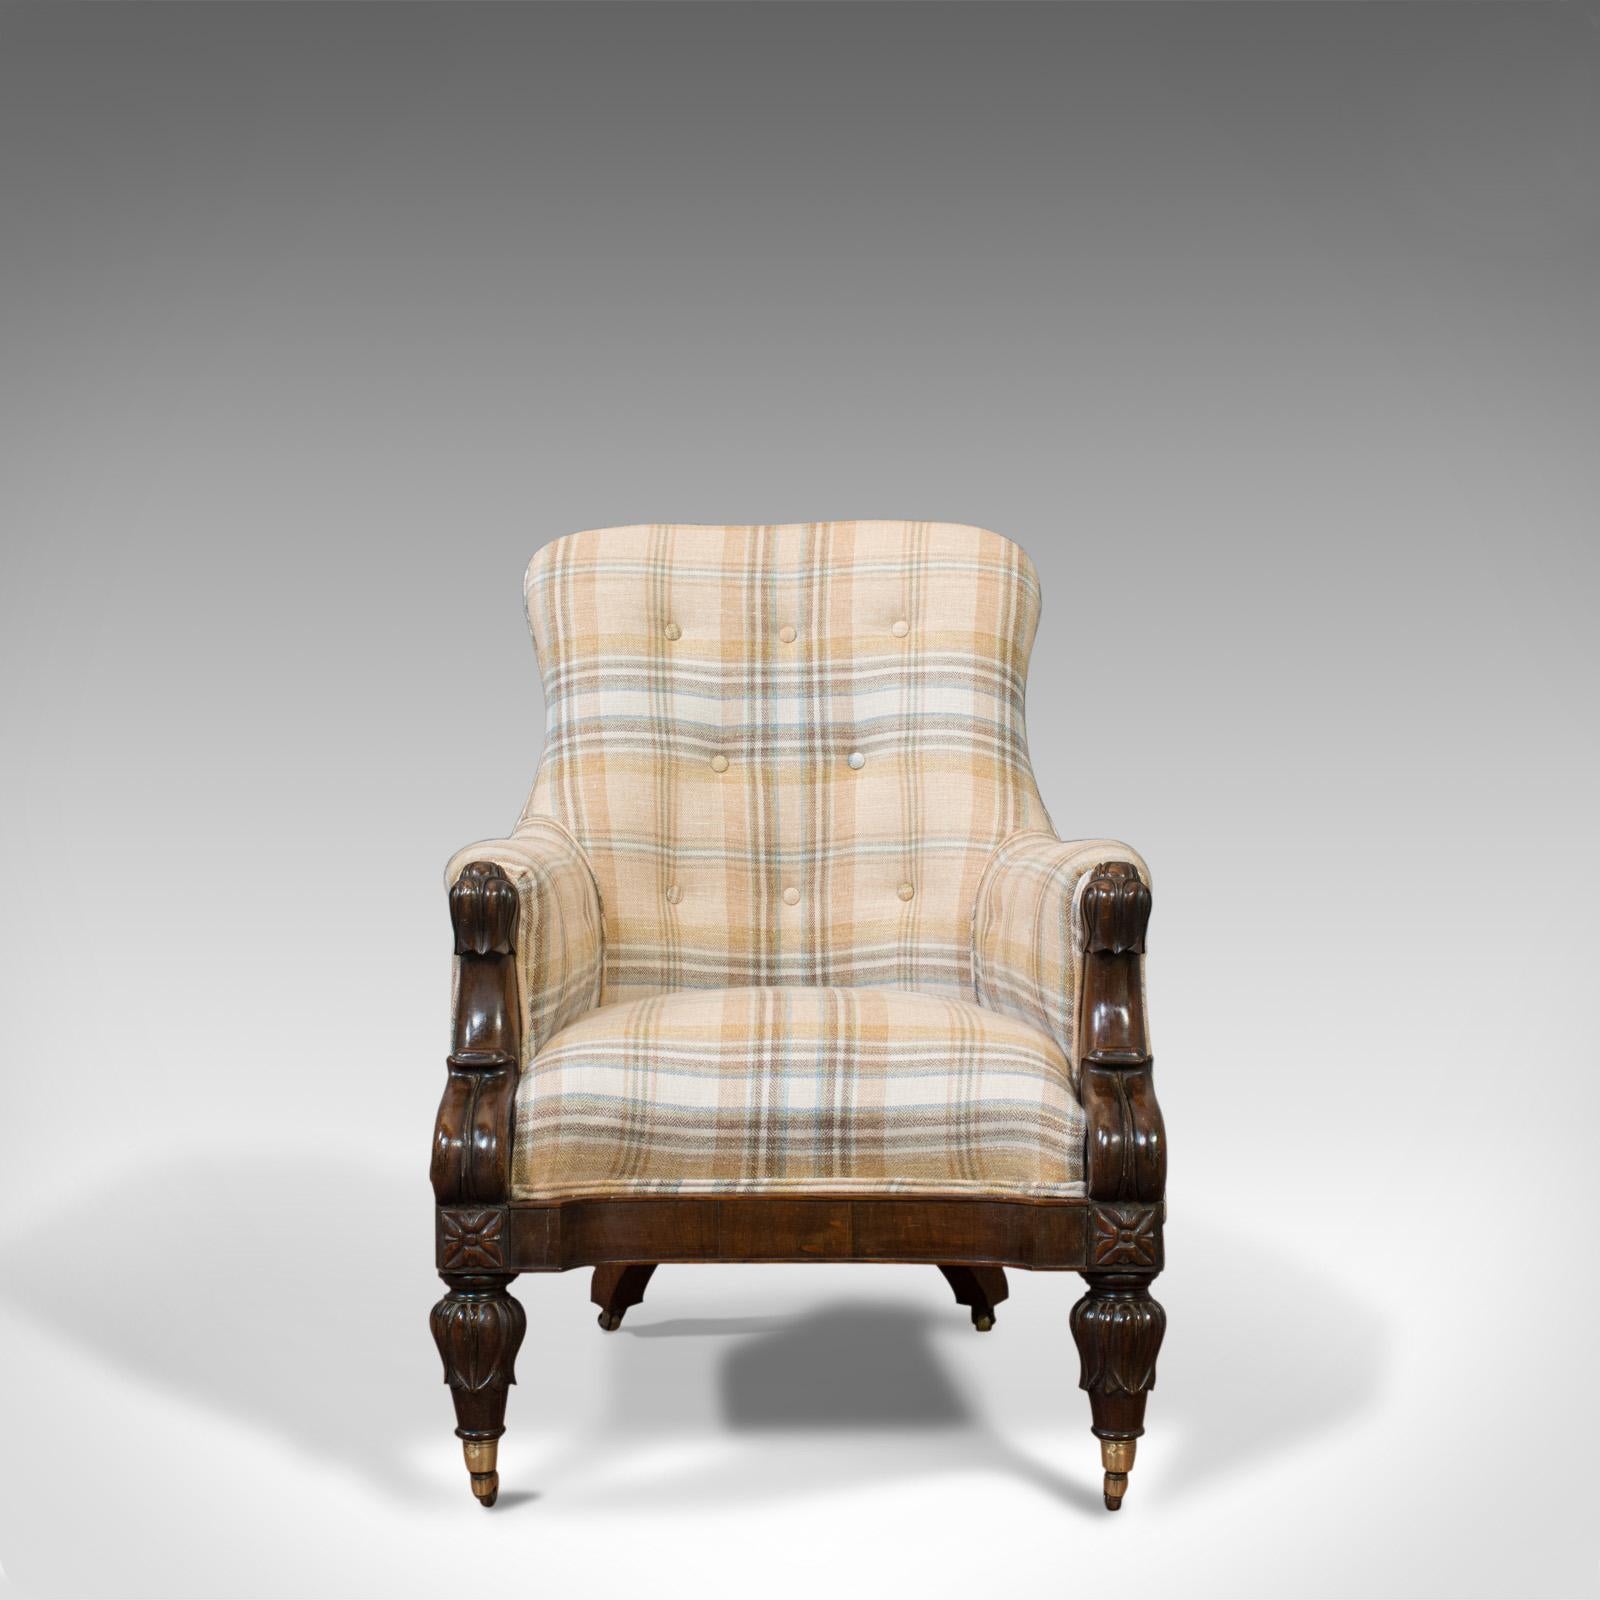 This is an antique gentleman's armchair. An English, rosewood fireside club chair dating to the William IV period of the early 19th century, circa 1835.

Of impressive form and of fine quality
Beautifully carved rosewood displays grain interest